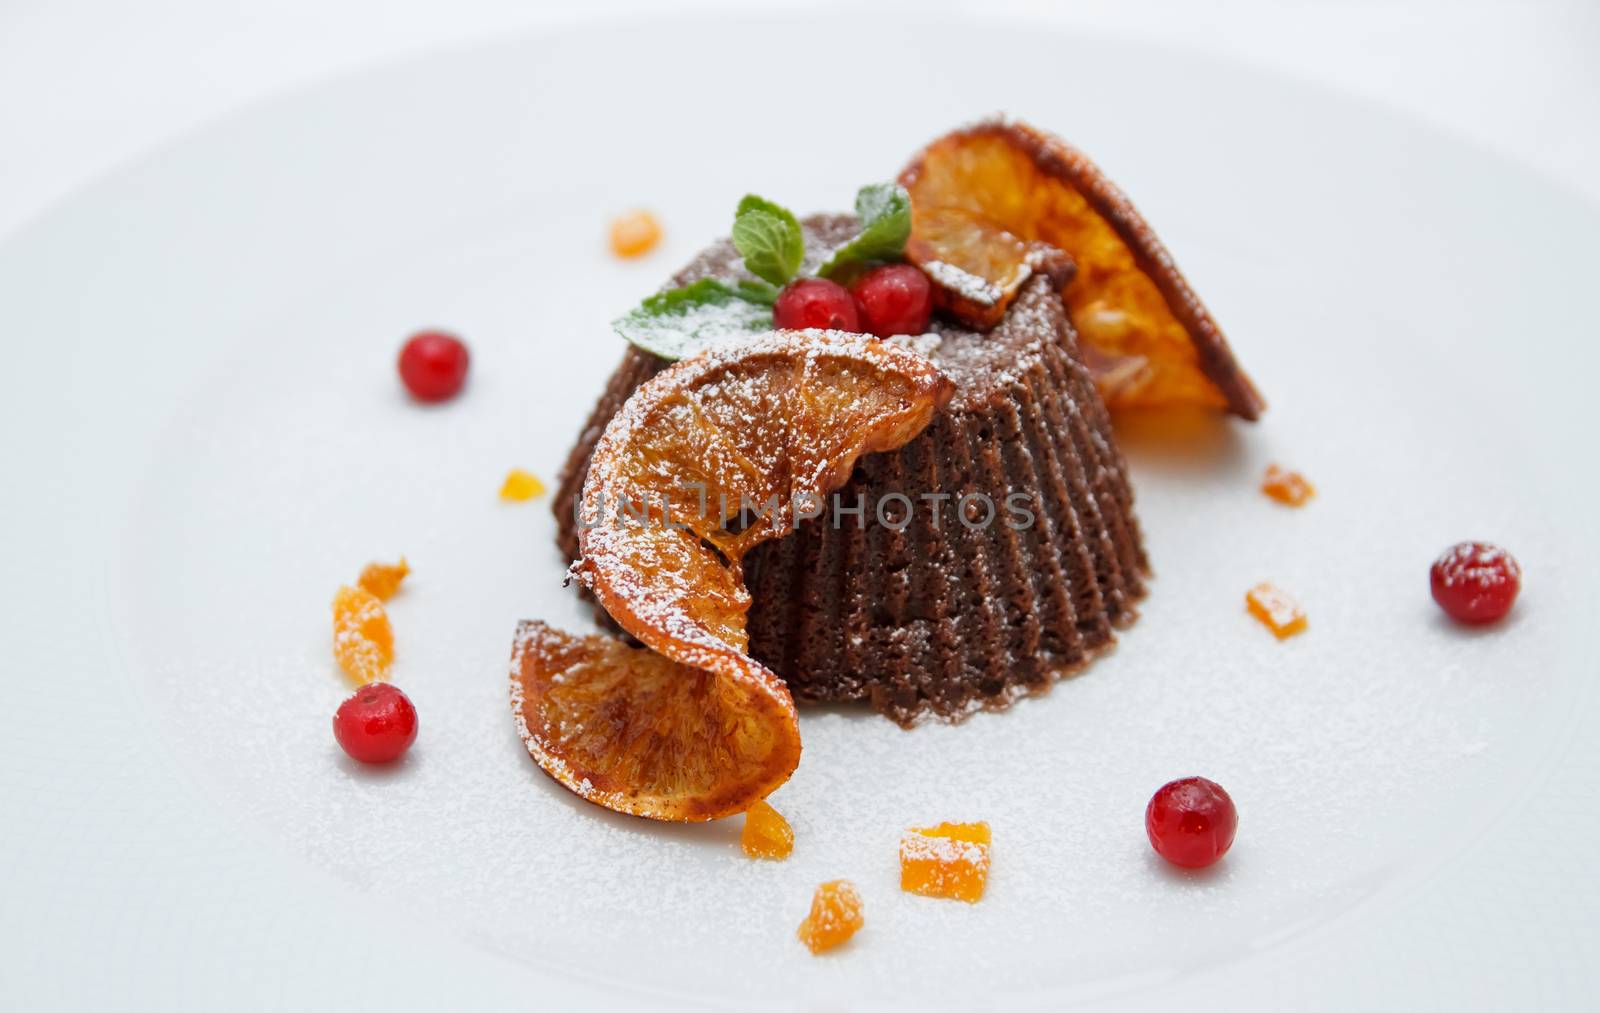 Chocolate orange cupcake decorated with fresh berries, sliced or by Angel_a